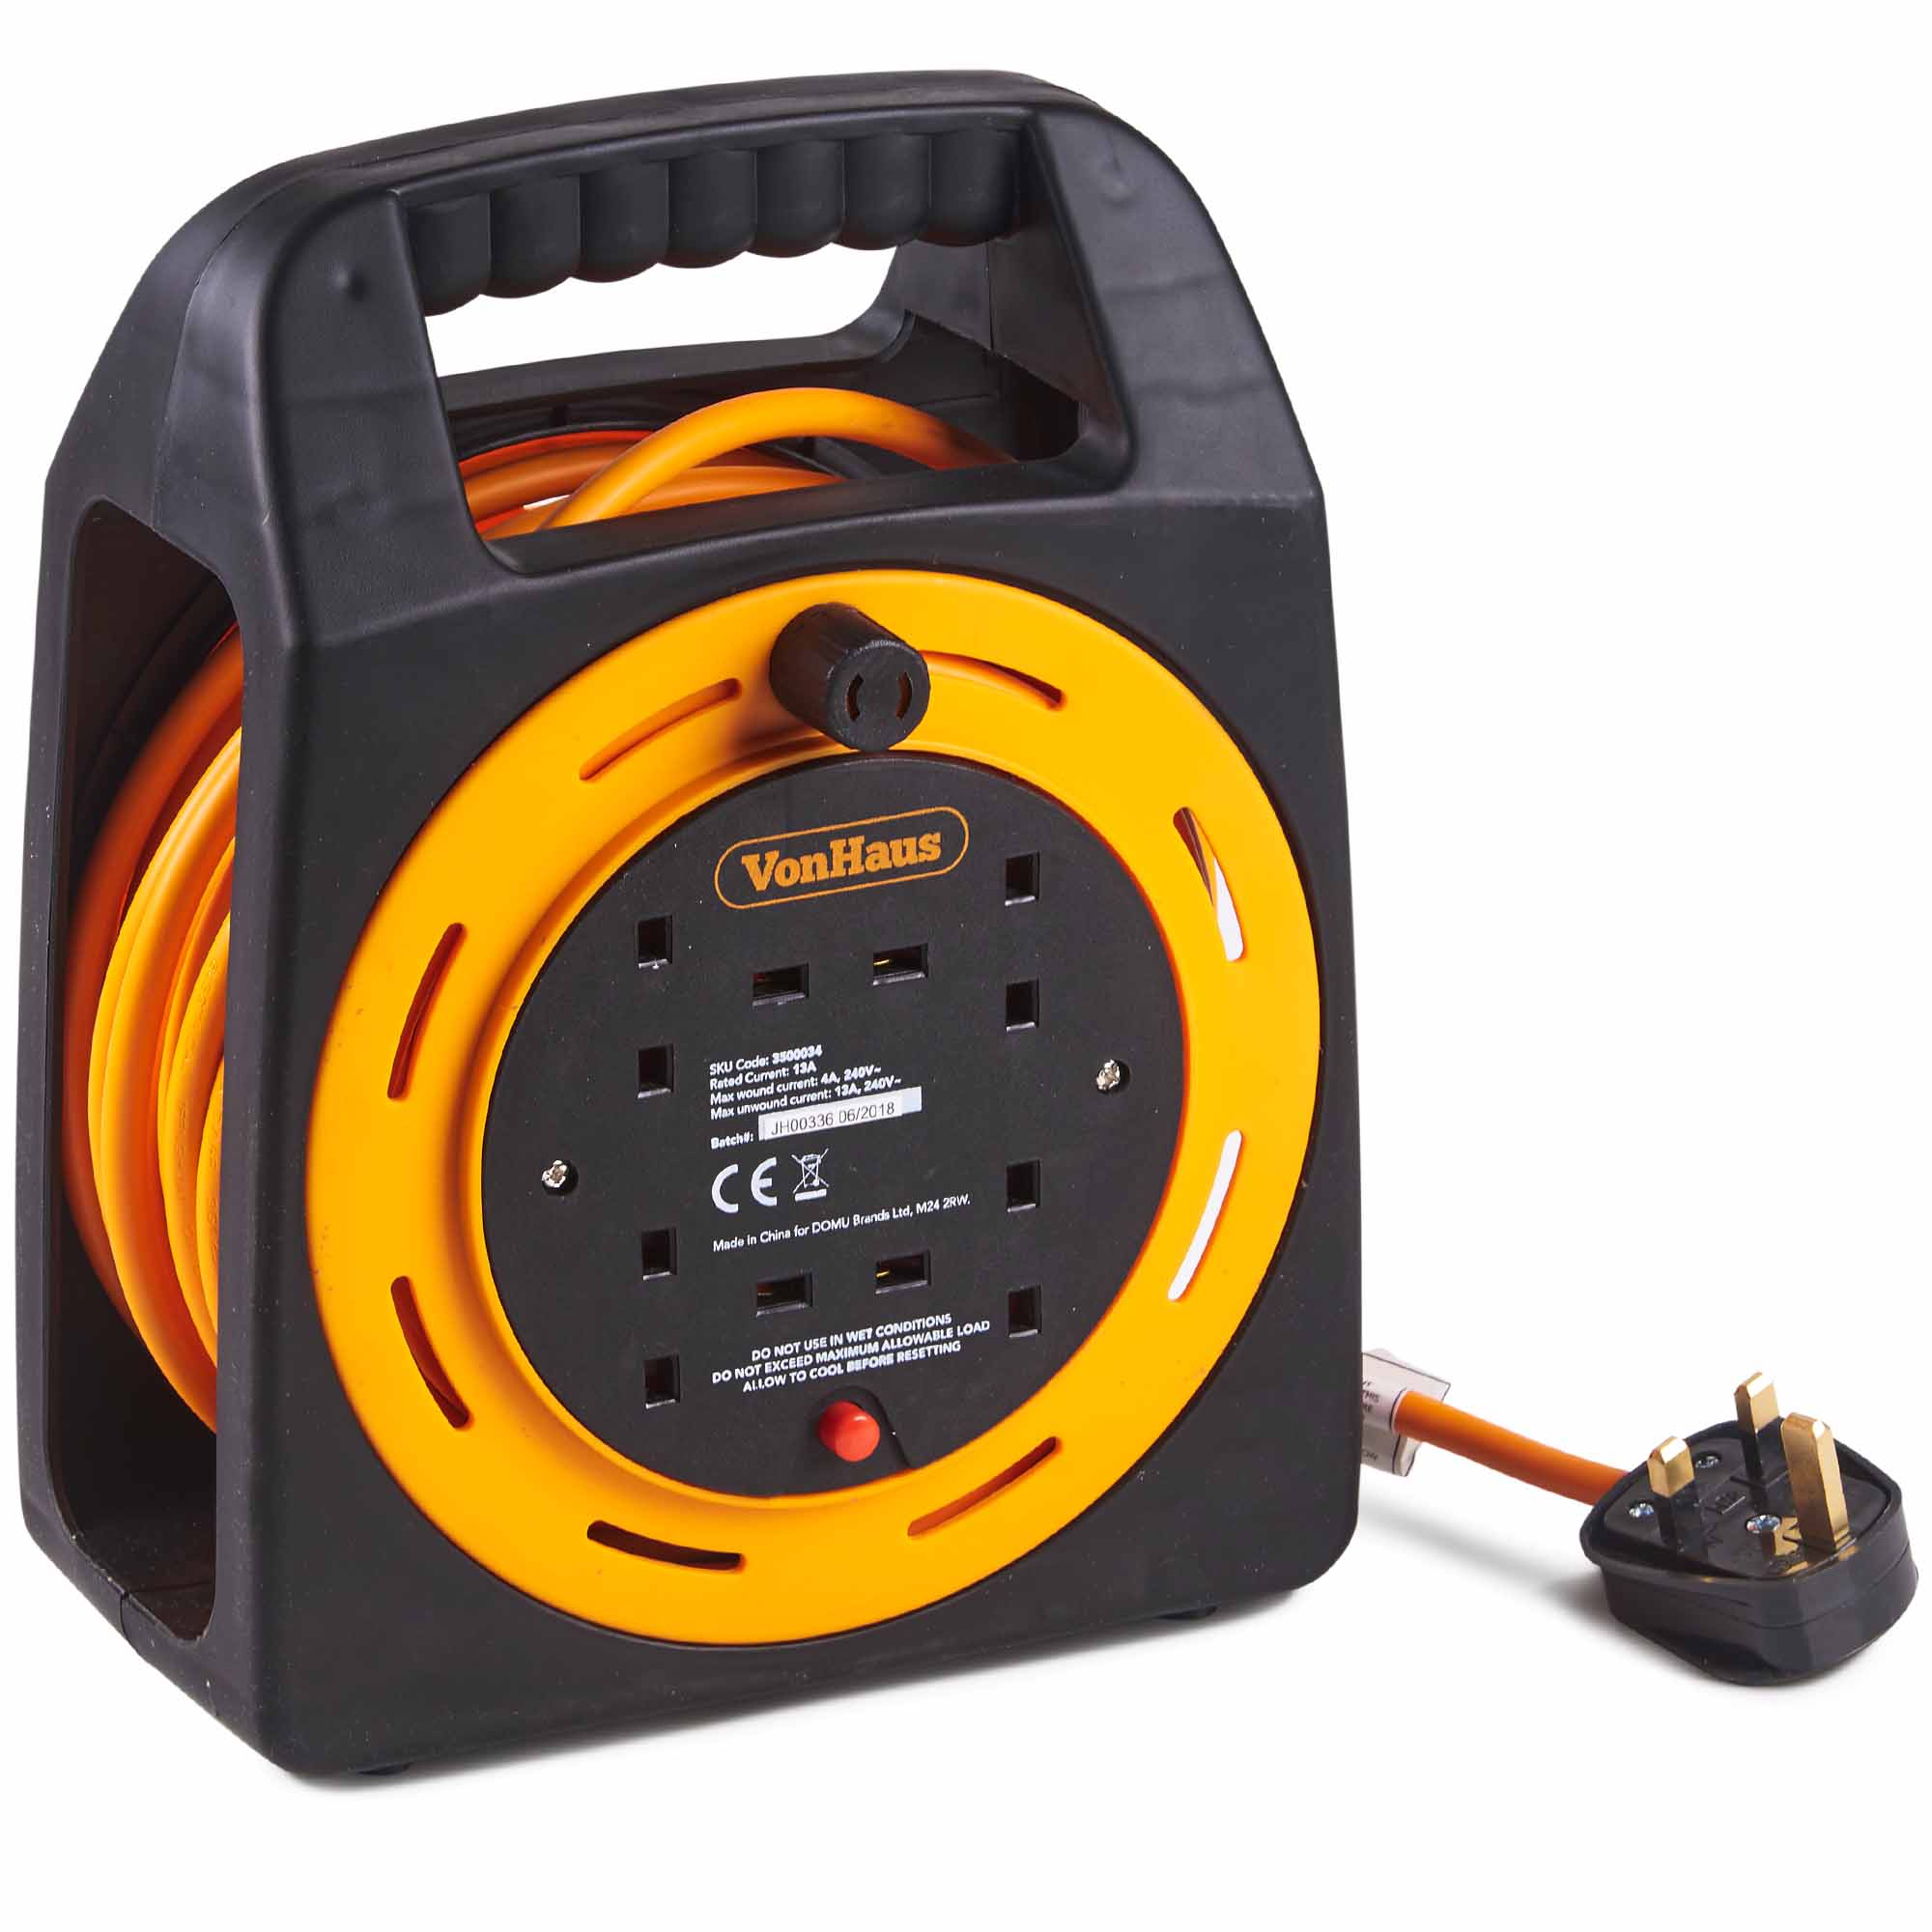 VonHaus 15m 4-Gang Extension Reel with Thermal Cut Out